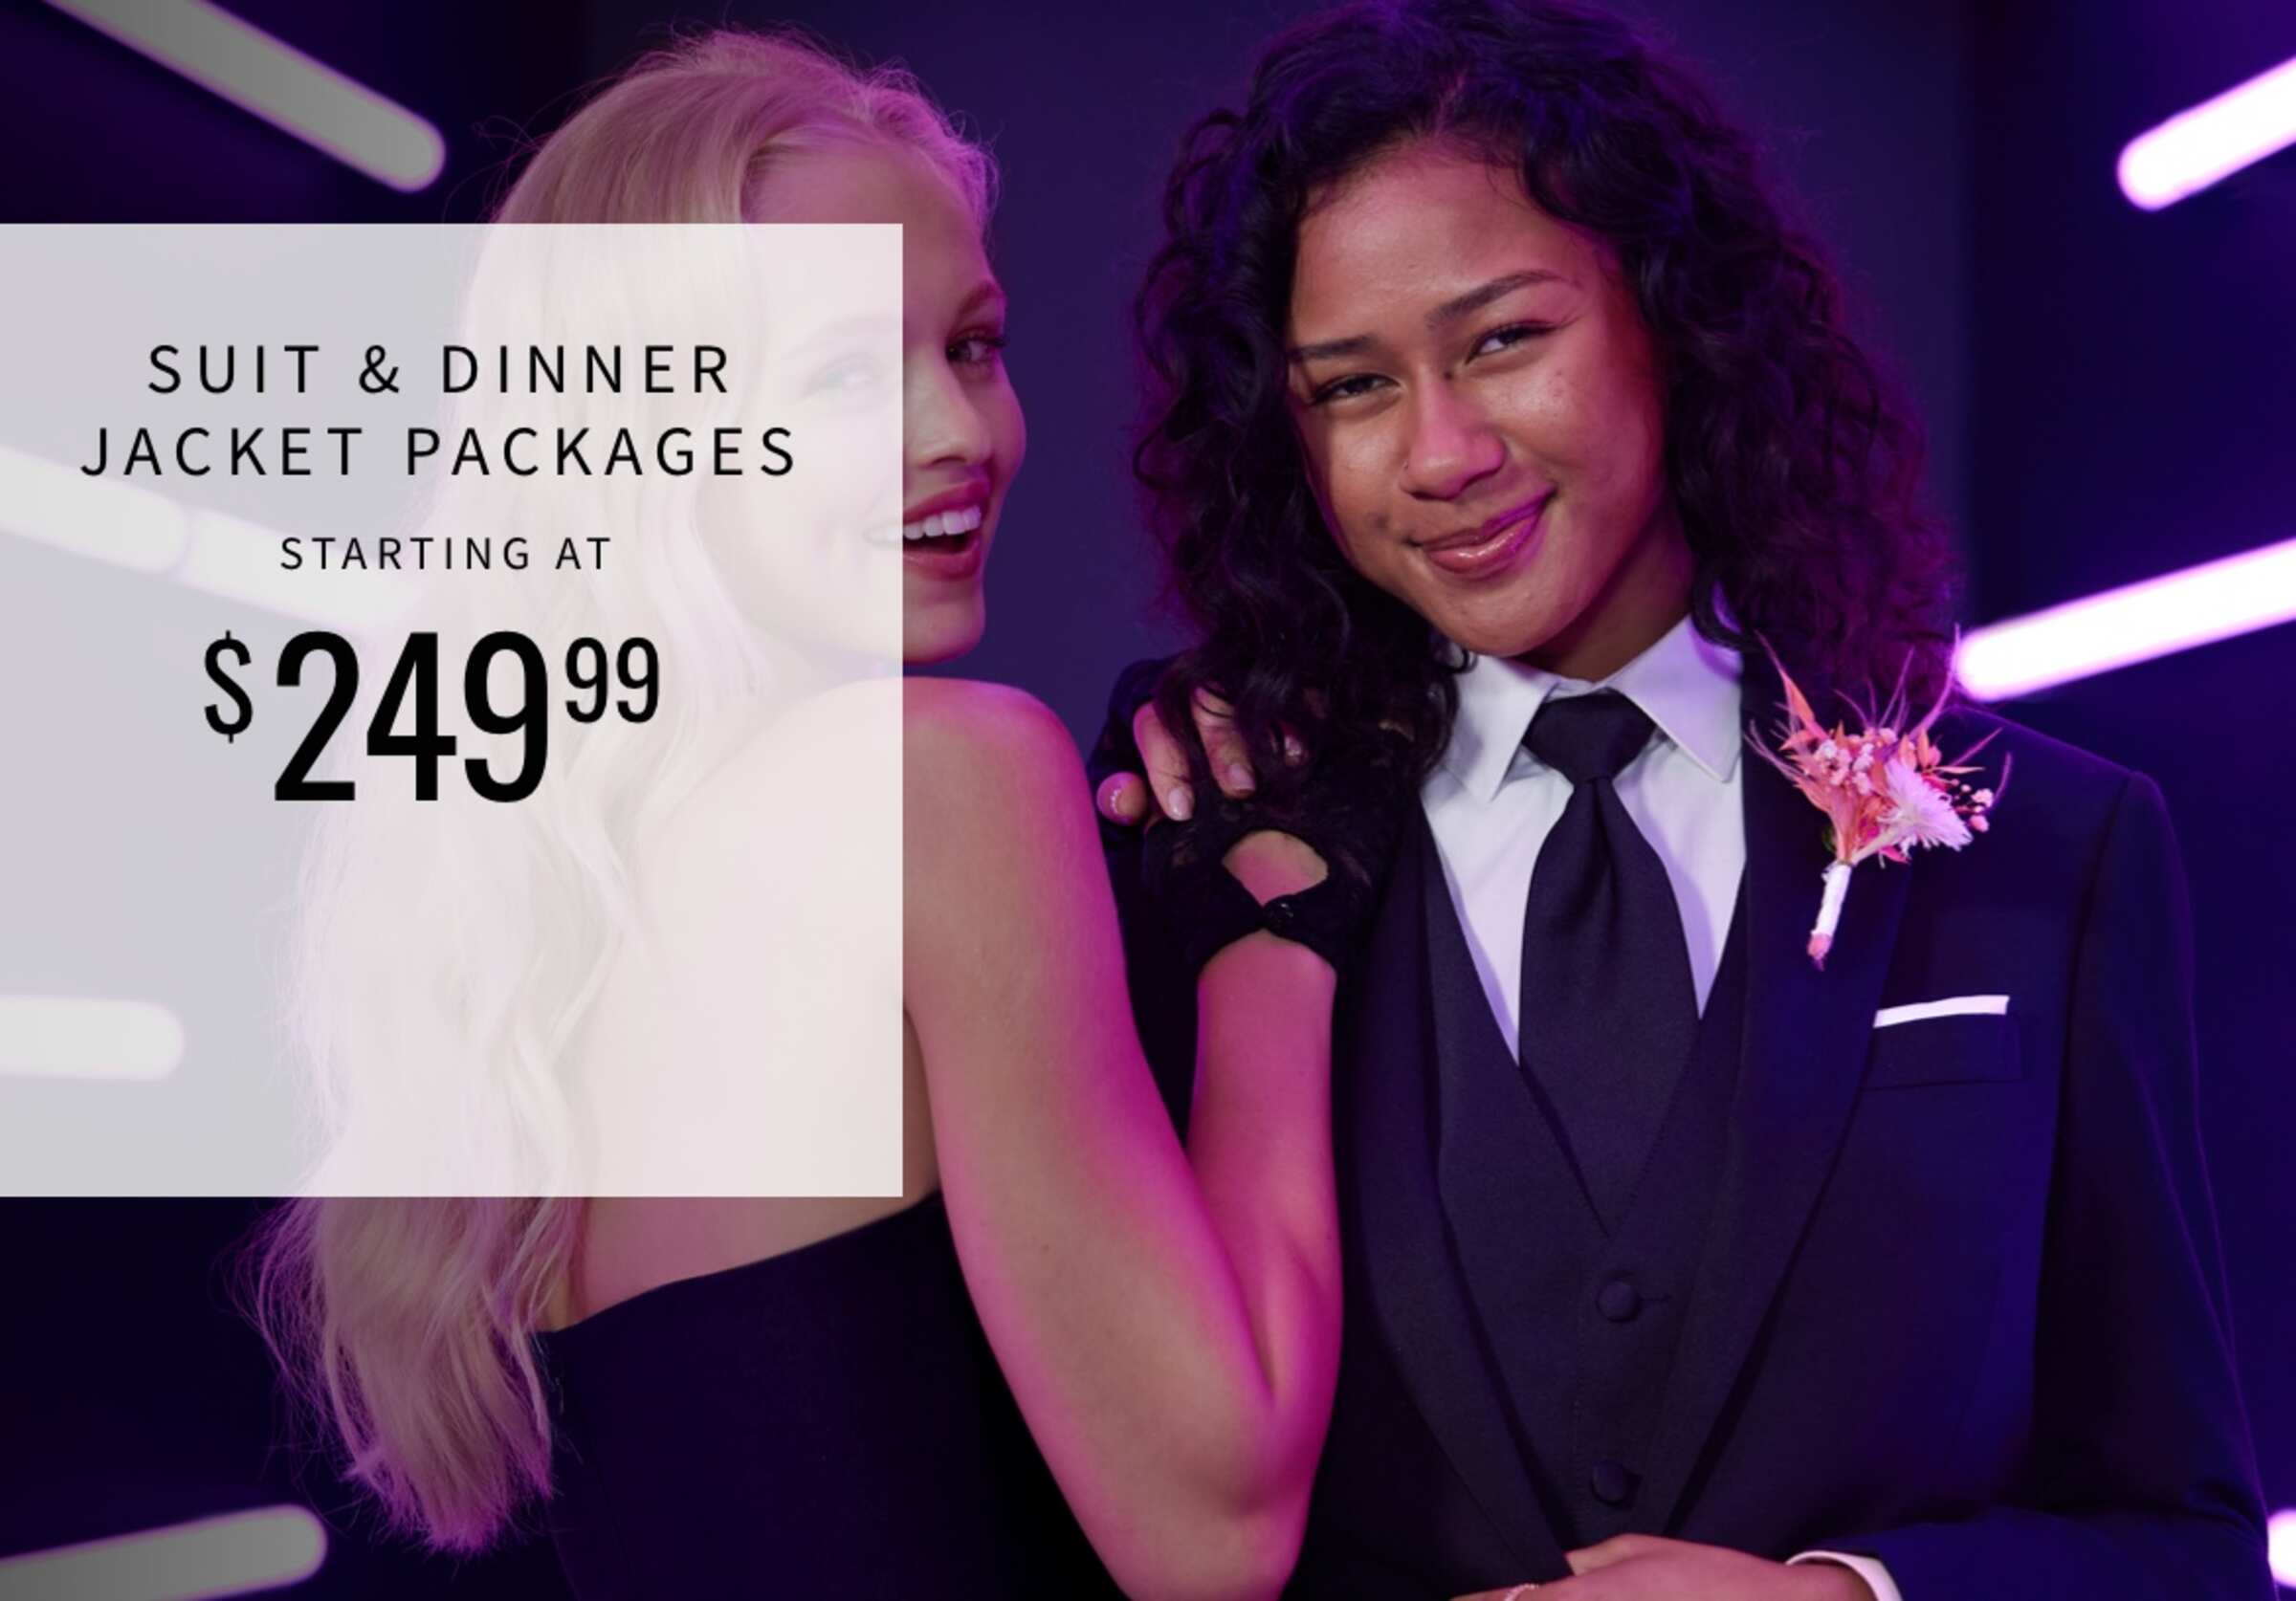 Suit and dinner jacket packages starting at $249.99